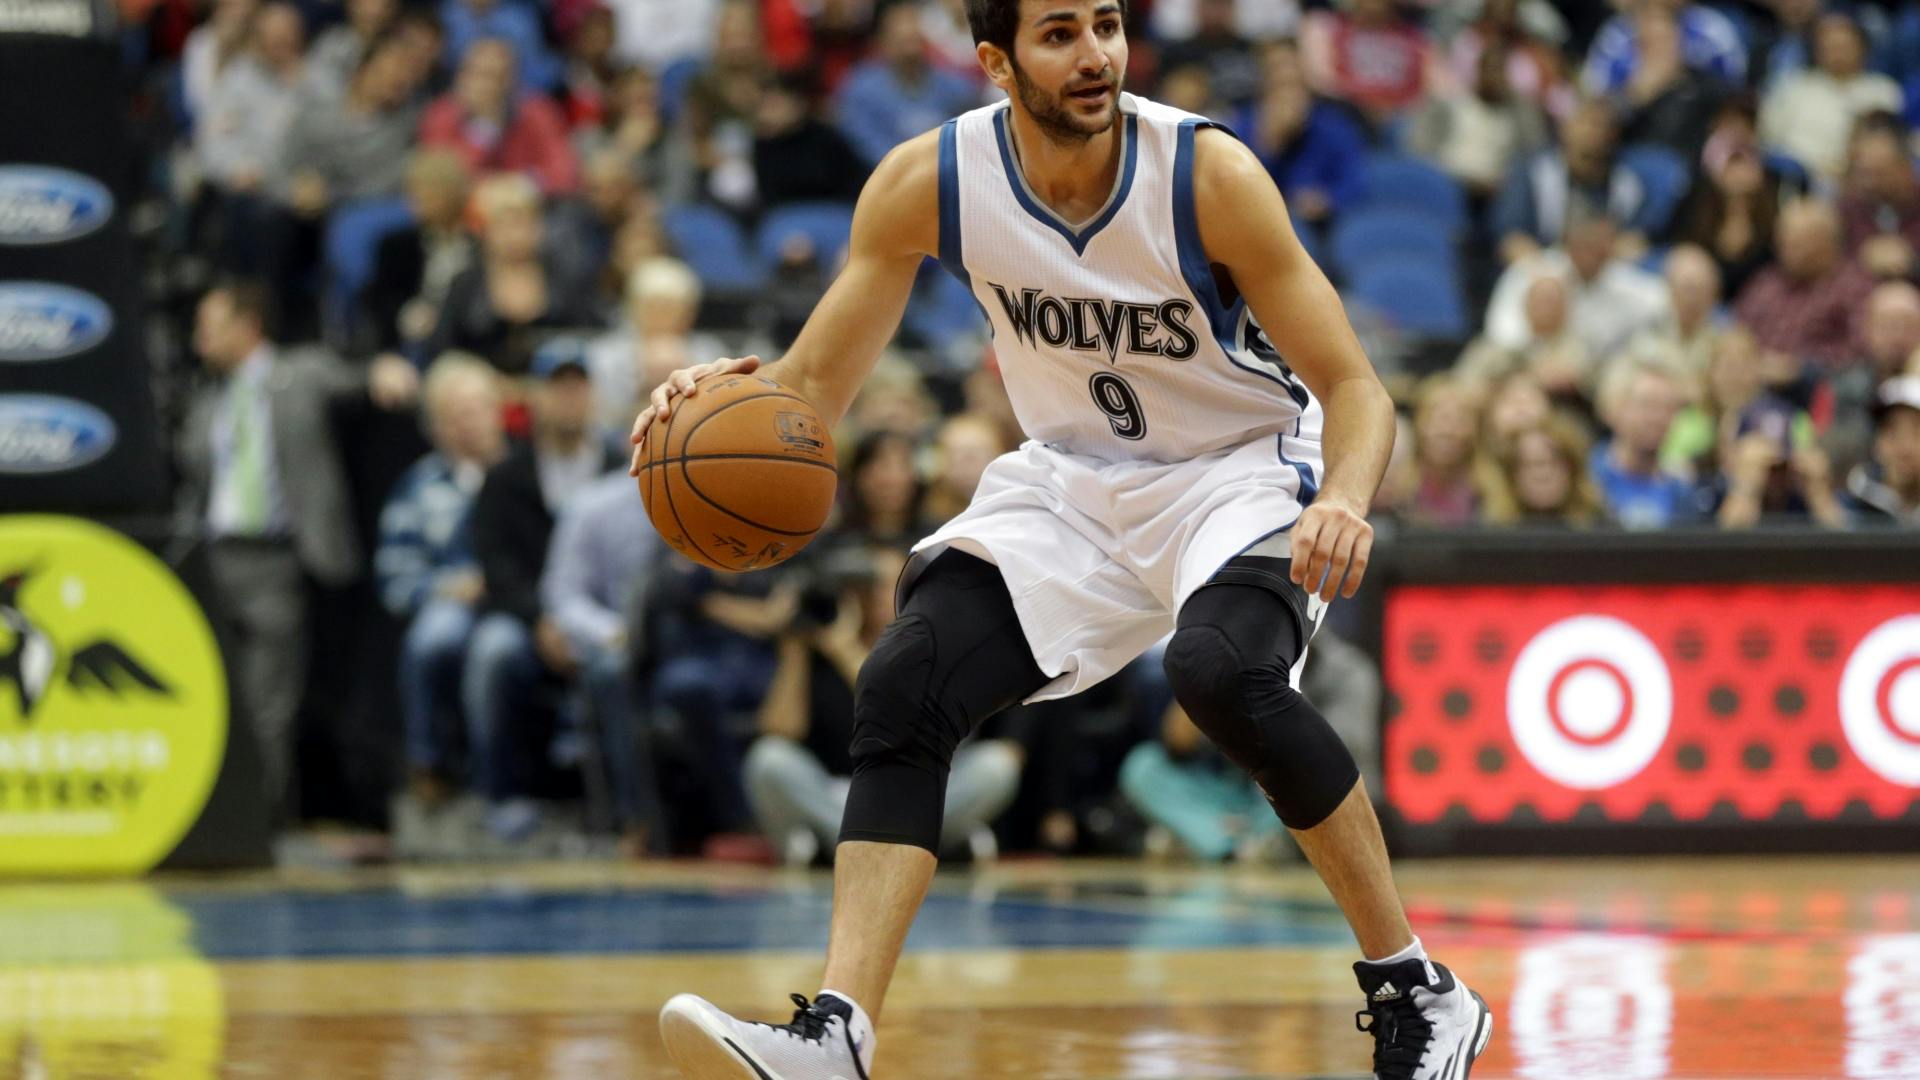 Ricky Rubio left Friday's 112-103 overtime loss at Orlando after a frighteningly ankle injury just before halftime that the team calls a sprain.